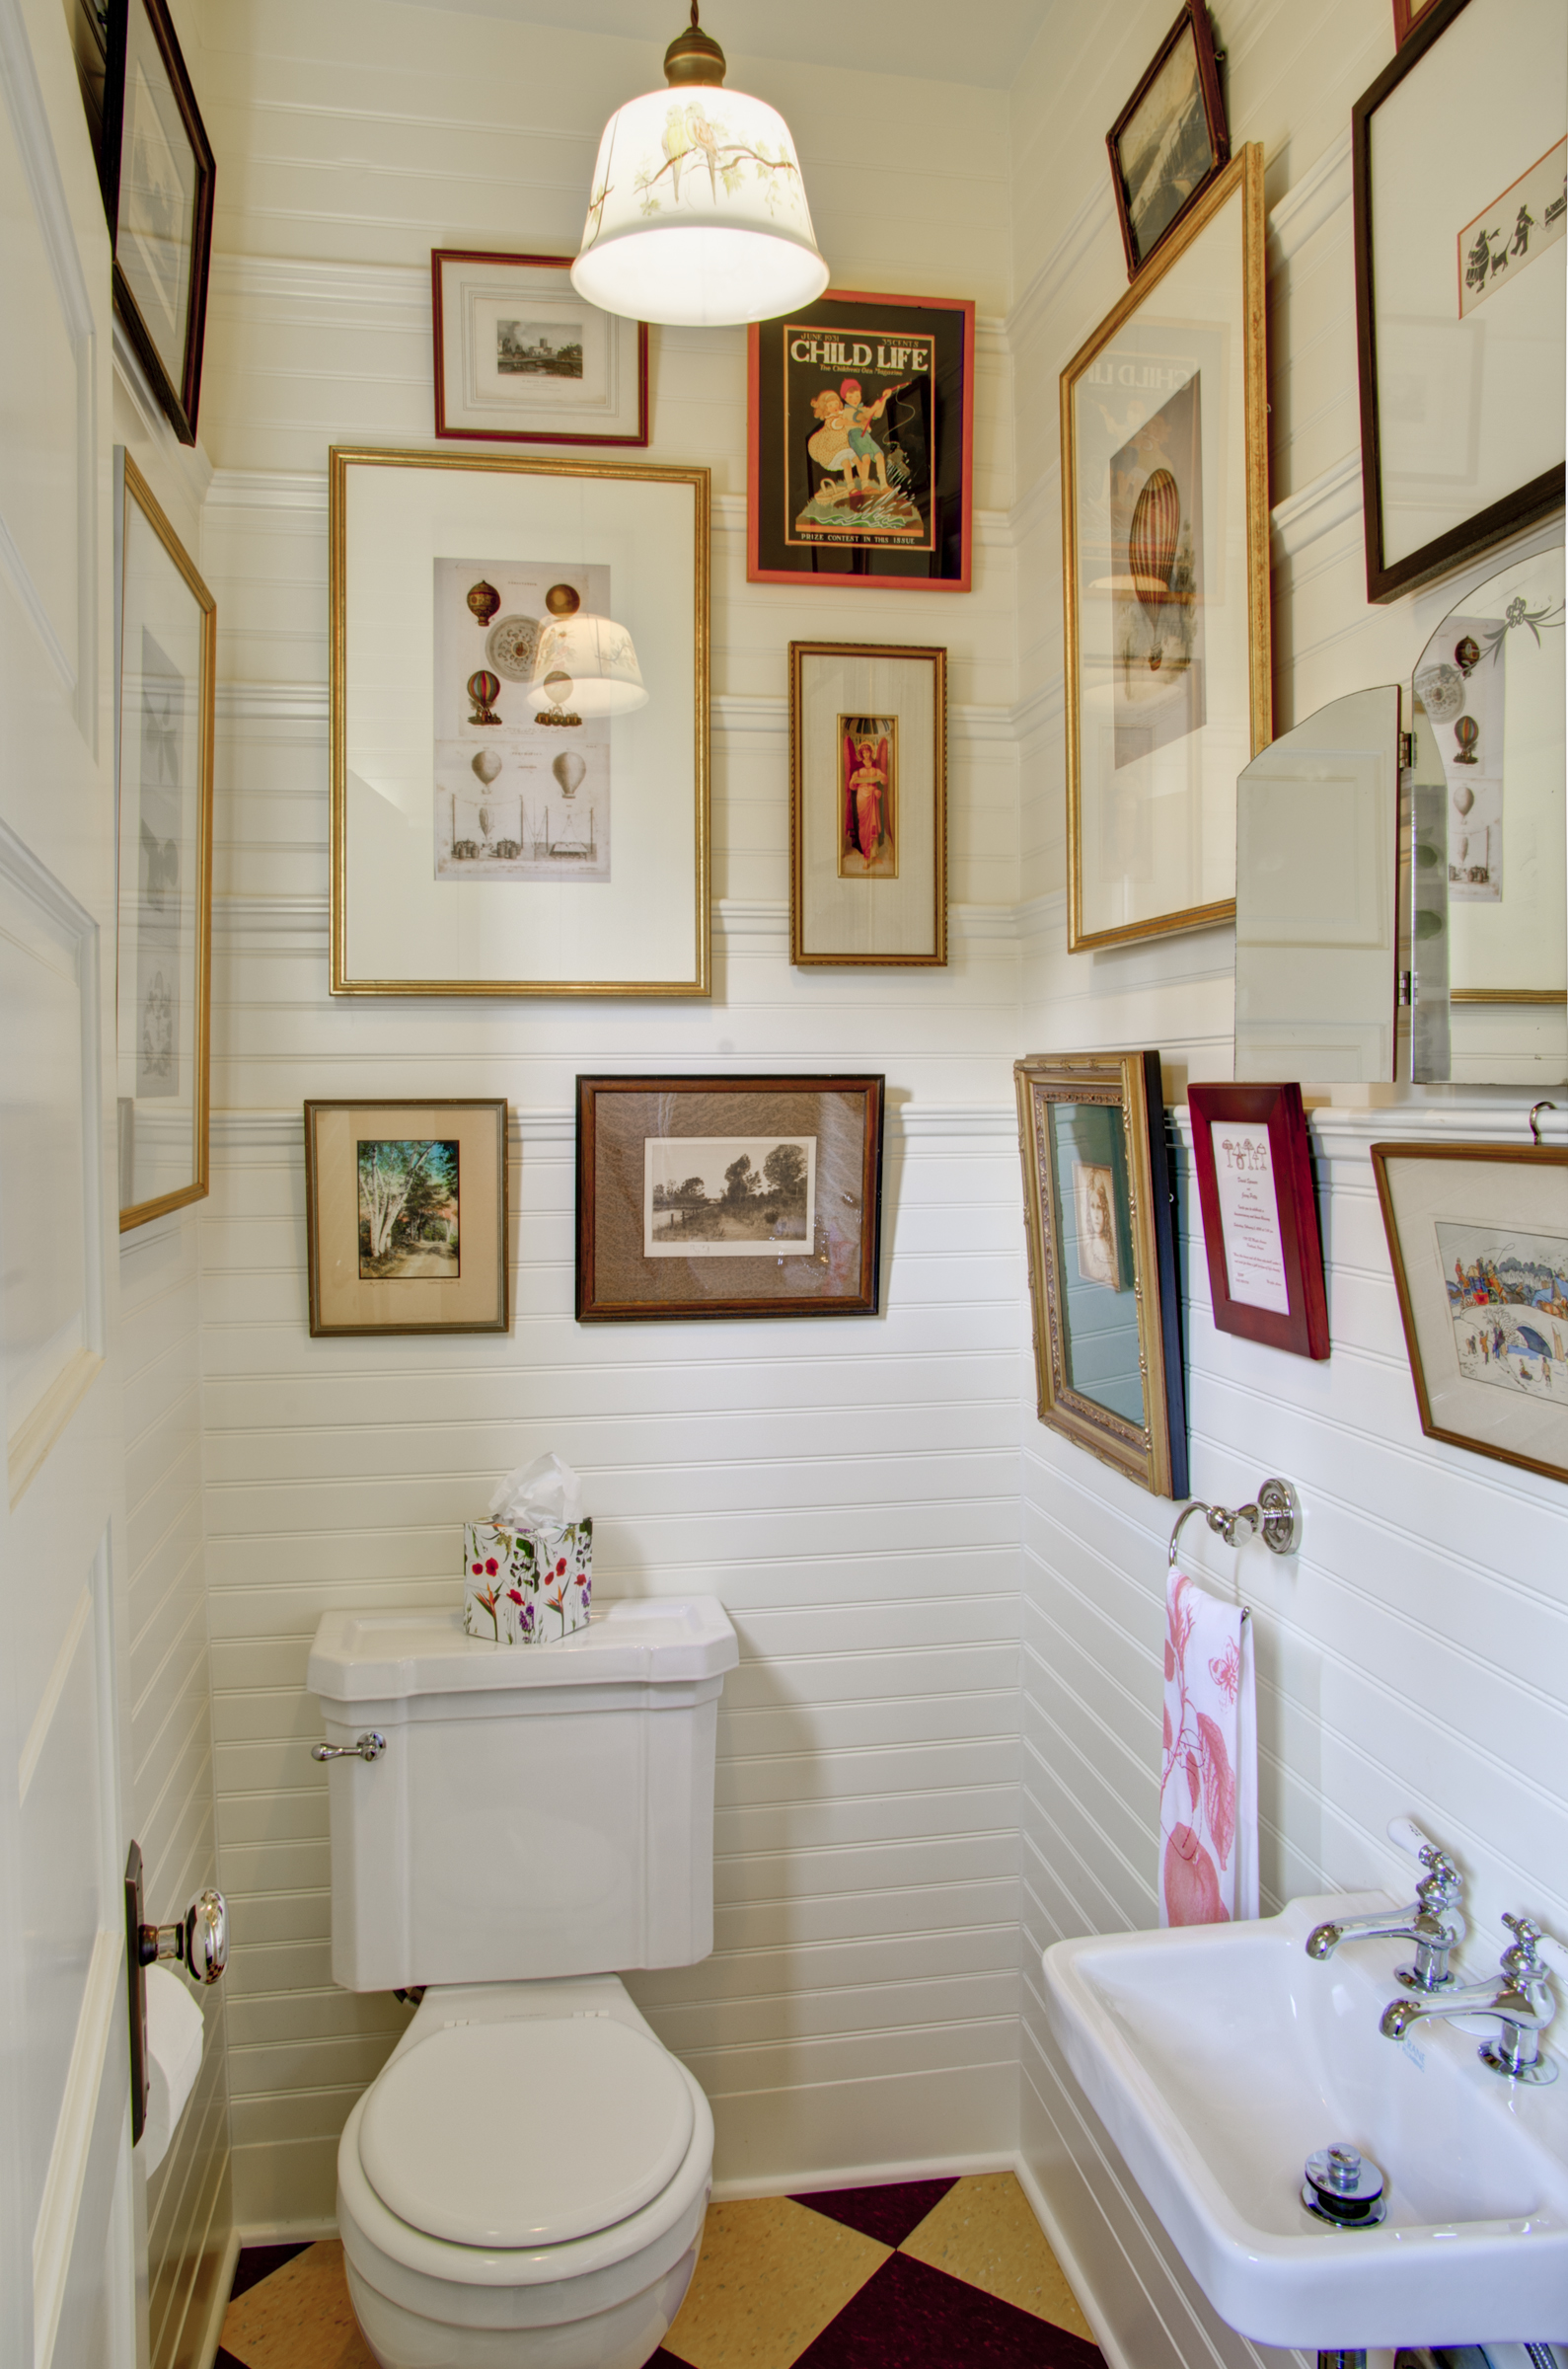 Bathroom Design with Picture Gallery Wall